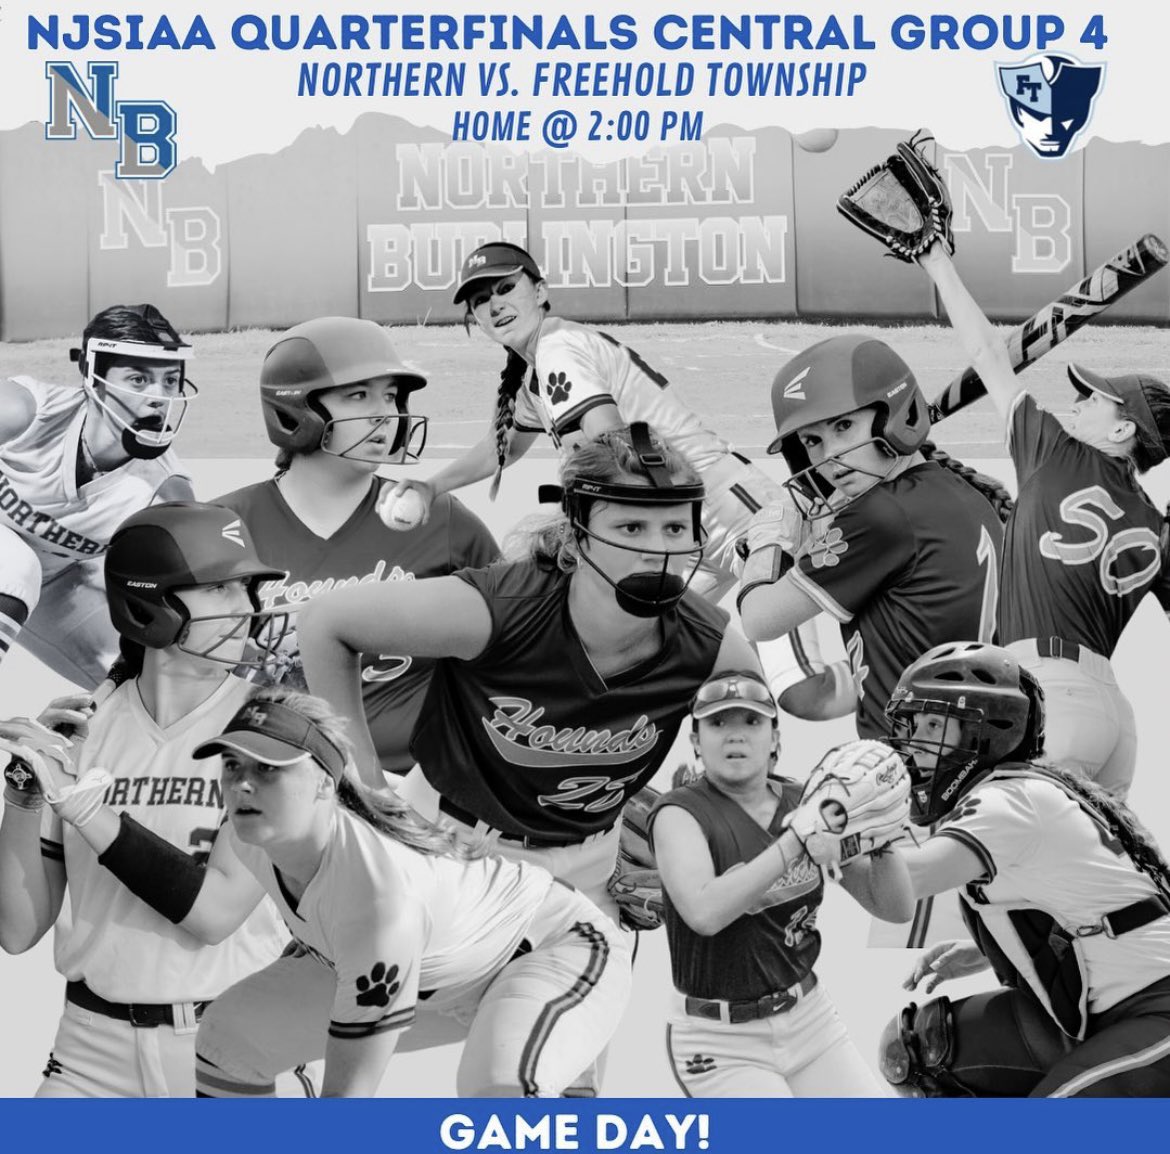 BACK AT THE FARM❕❕❕
Round 2 vs Freehold Twp. at 2 today🥎🔵